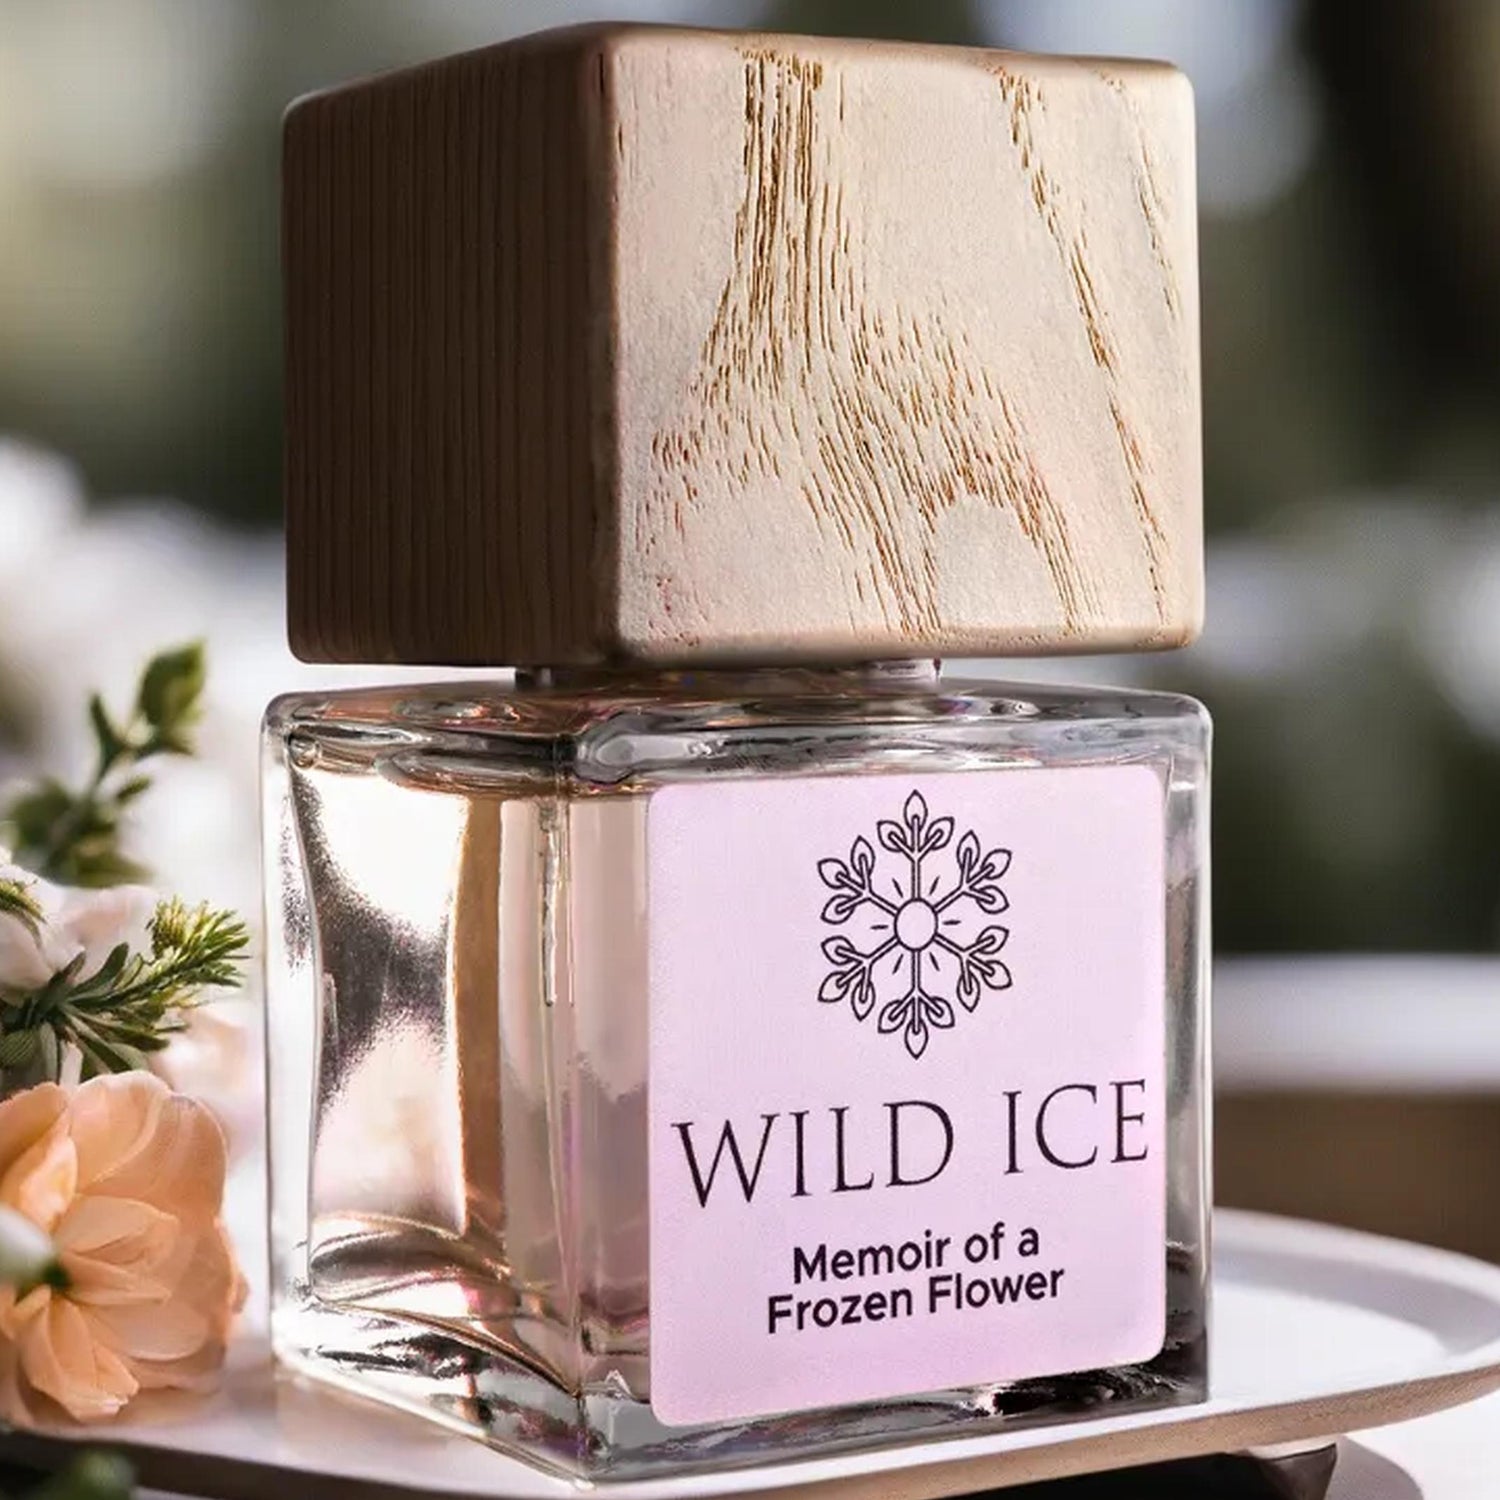 Memoir of a Frozen Flower: Delicately Floral, Cold-Preserved Perfume — Pure, Organic Ingredients for Delicate &amp; Sensitive Skin